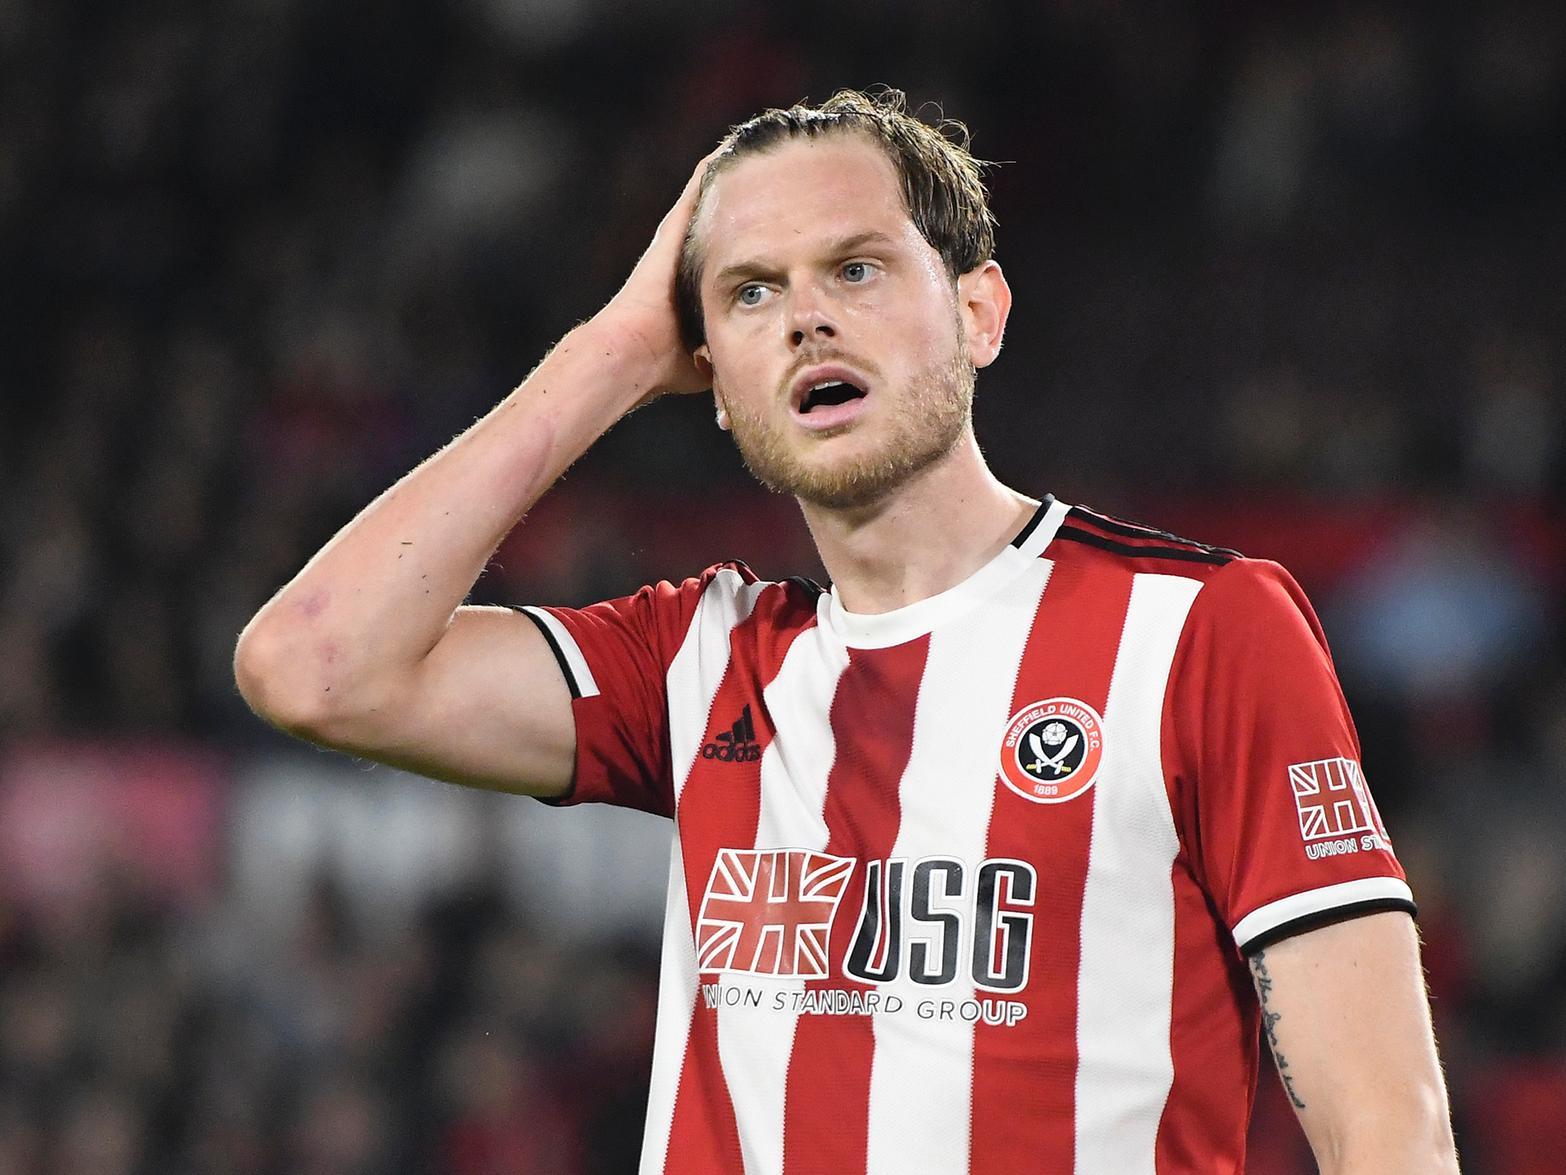 HuddersfieldTown could look to make a move for Sheffield United defender Richard Stearman, who has barely featured for the Blades since their promotion to the top tier. (Football Insider)